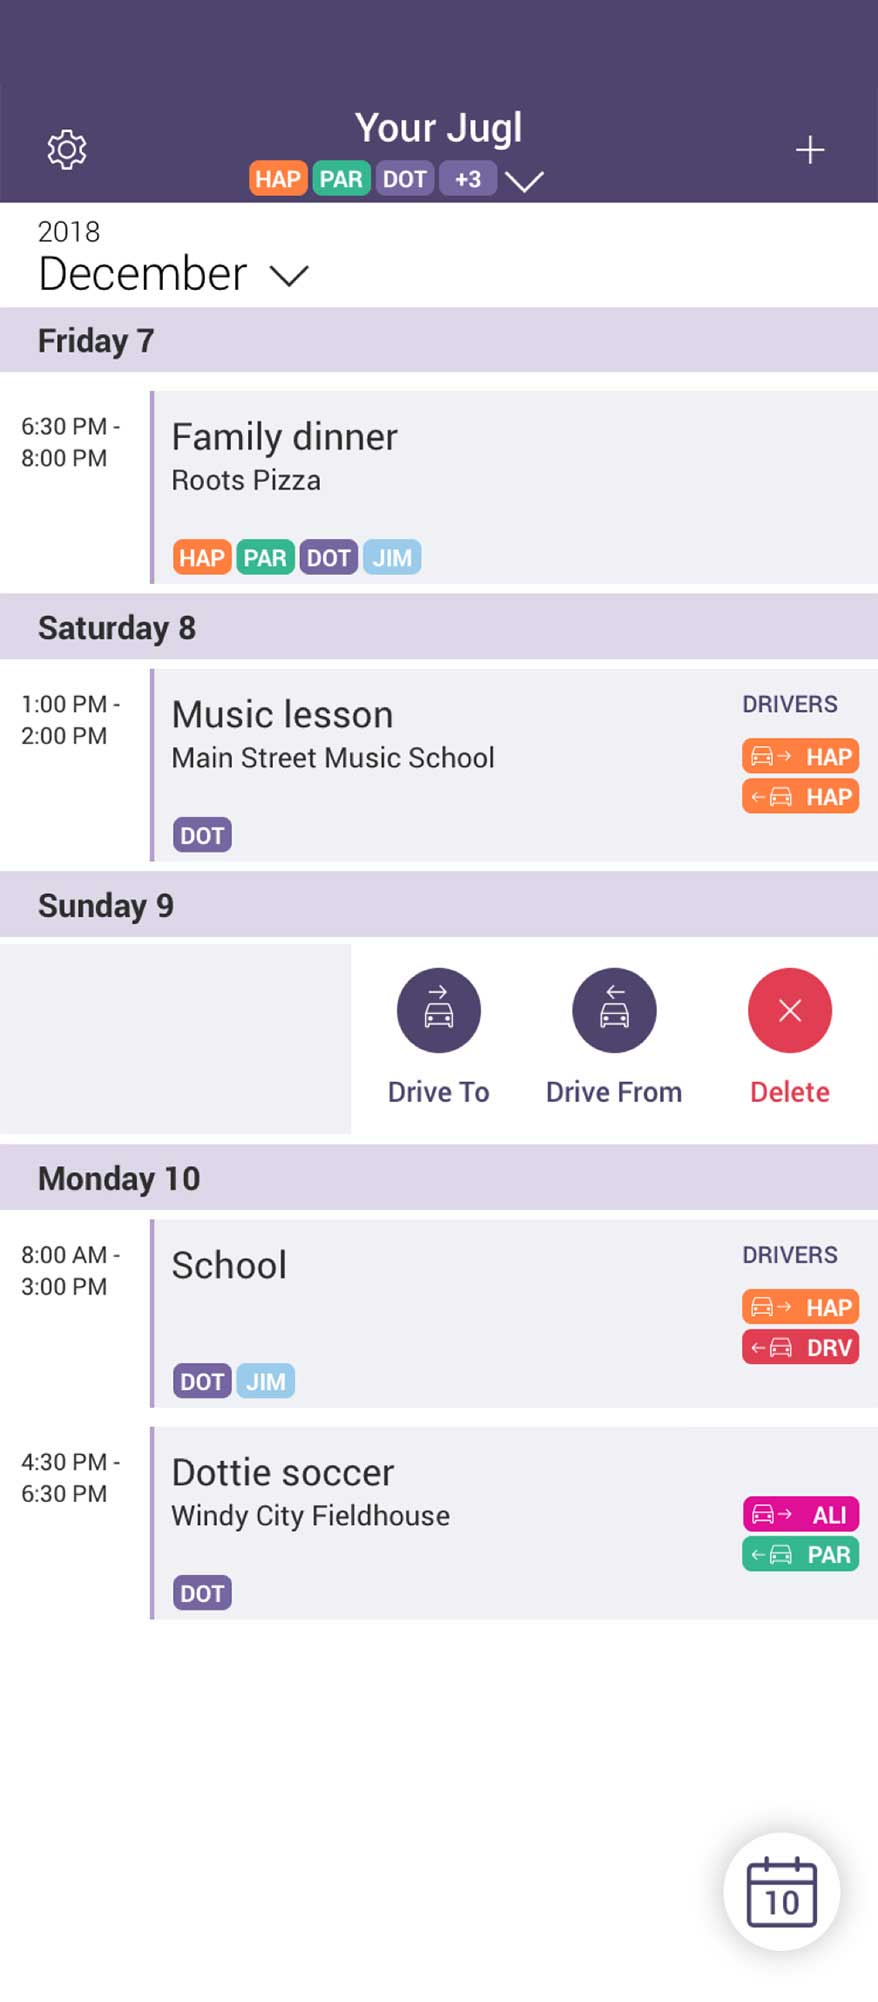 Schedule view of the Jugl mobile app, where the user has swiped on an event to show the Quick Actions menu.